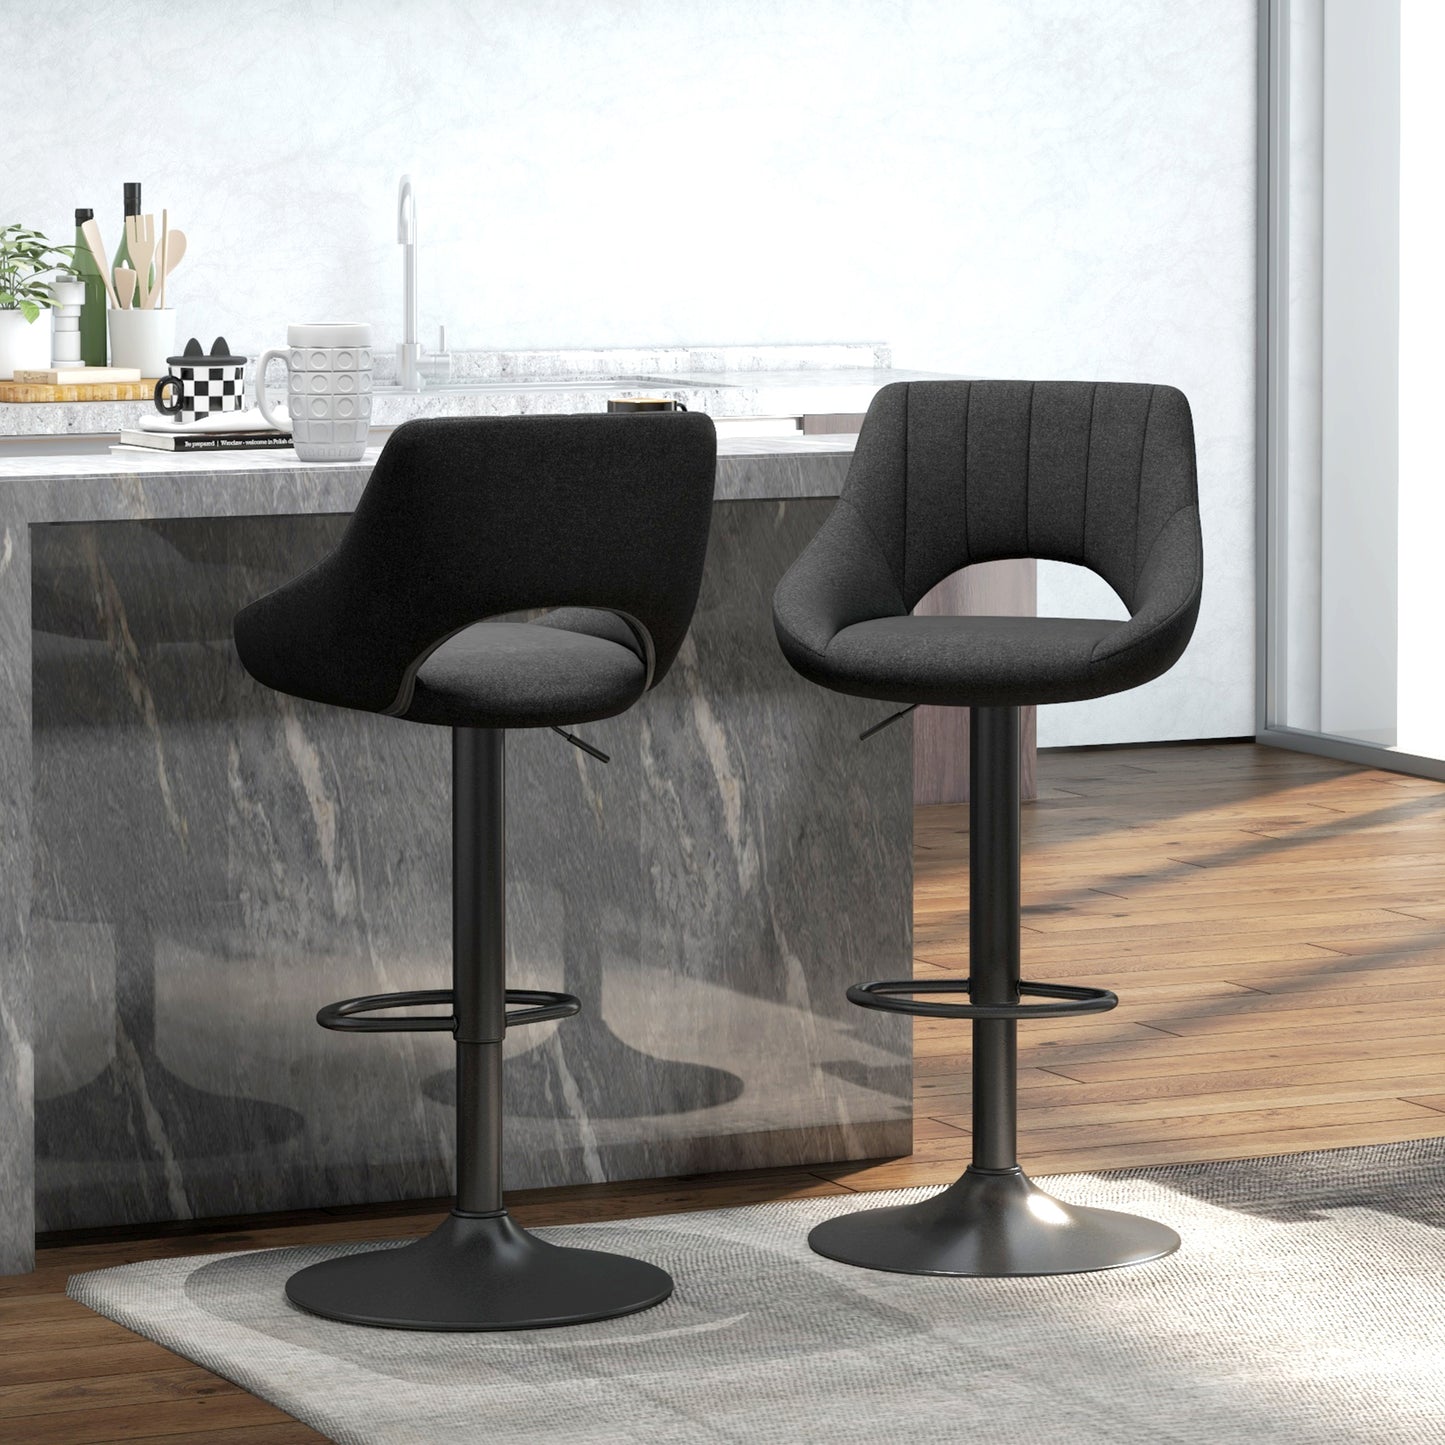 Swivel Bar Stools SET OF 2, Linen Upholstered Counter Height with Round Metal Base